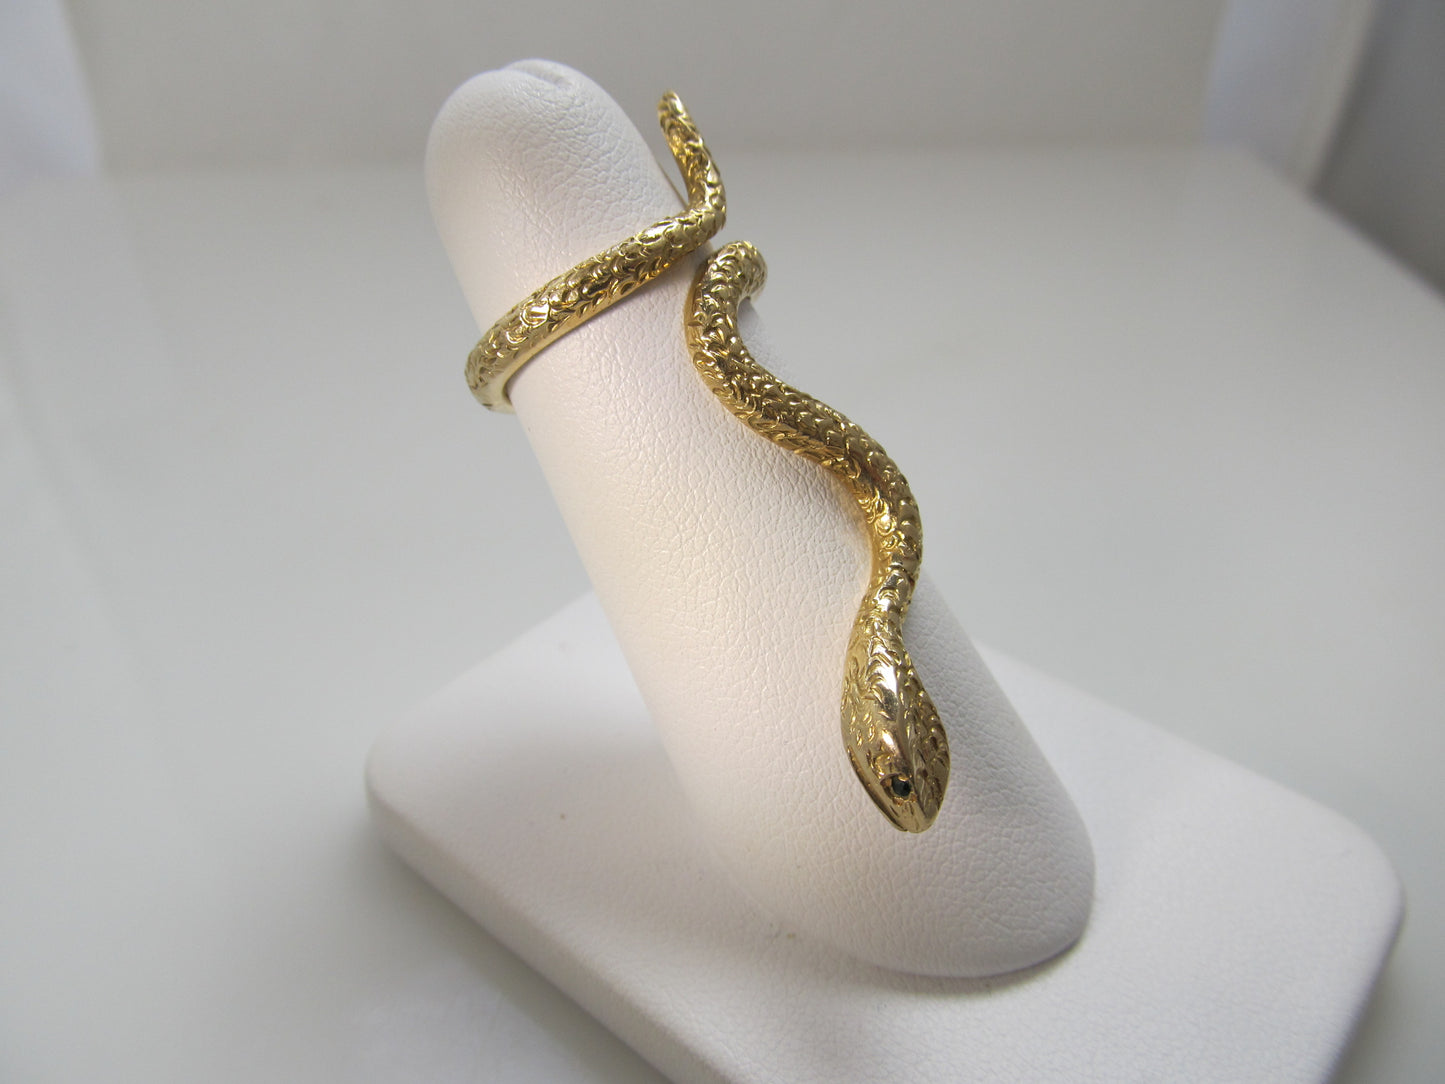 Neat vintage long snake ring with sapphire eyes